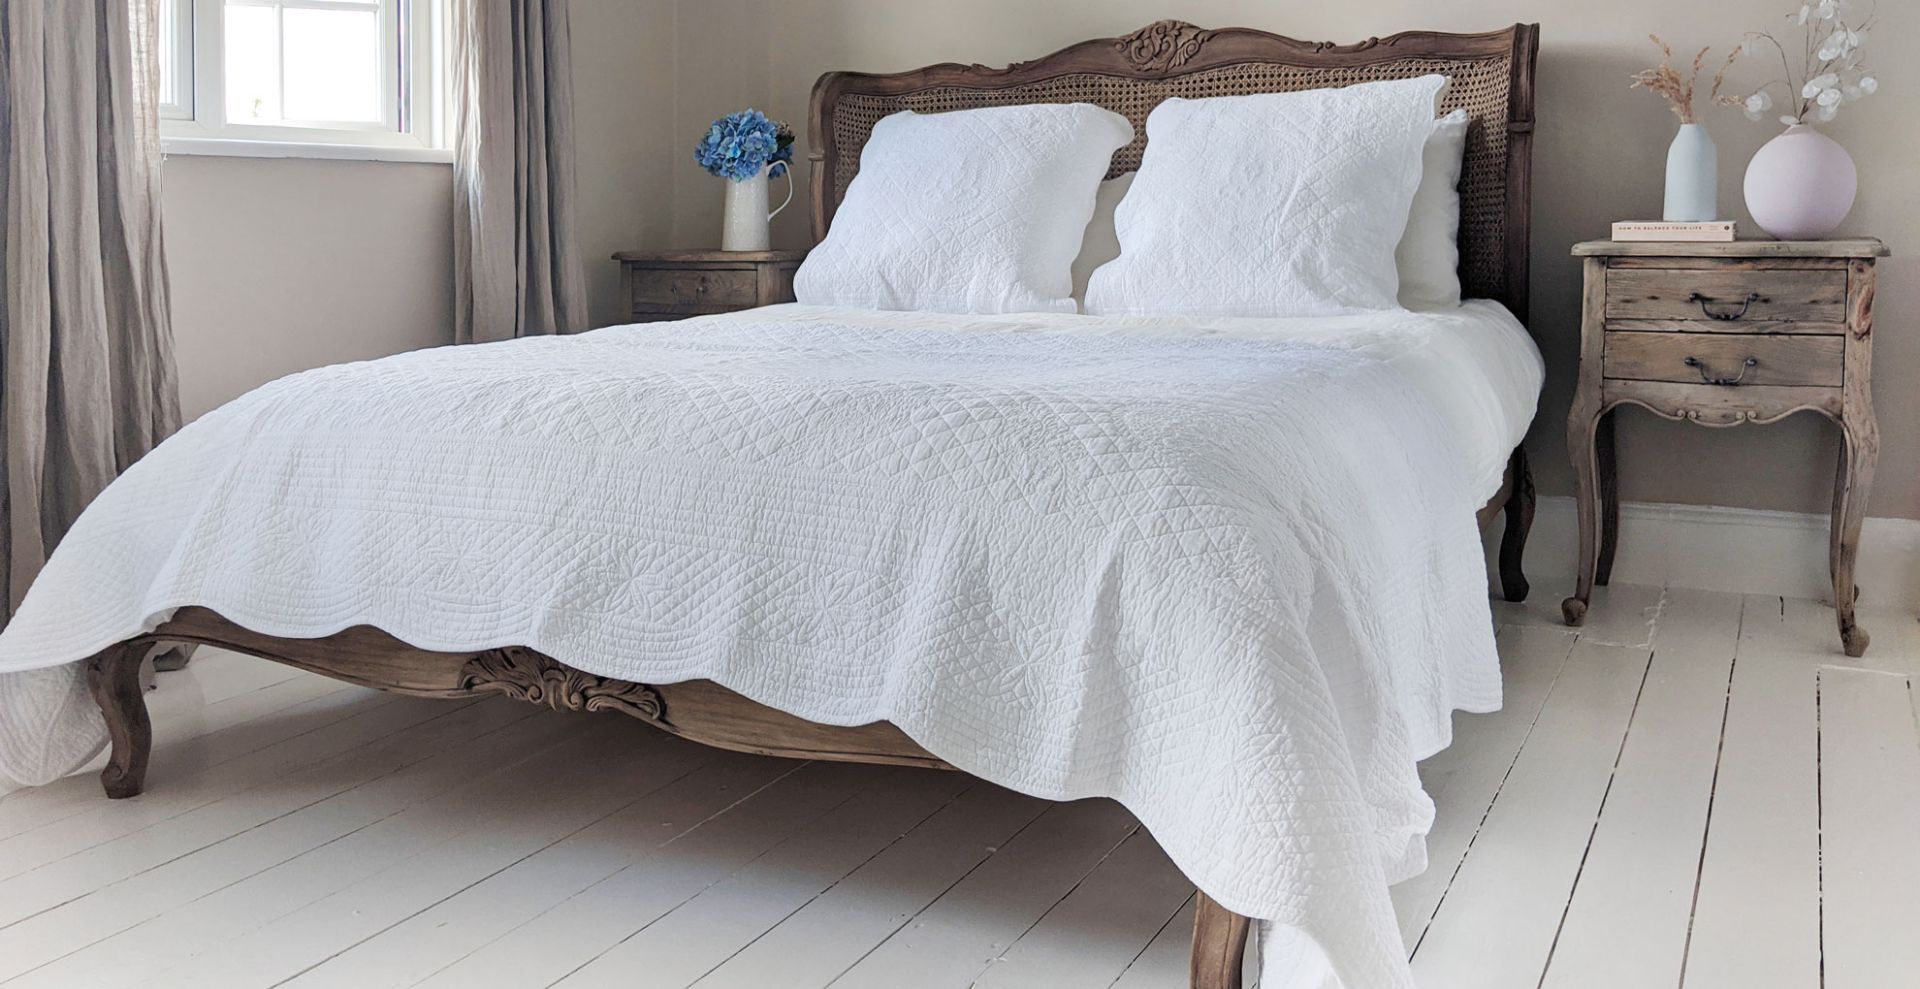 <p>                     No matter what type of duvet you choose, whether a feather option or a modern hollow-fiber design, the key to making it feel hotel-worthy is the size that you choose.                    </p>                                      <p>                     As potentially one of the most important elements of a bedroom, Georgia Metcalfe, founder of French Bedroom explains how 'size matters' when it comes to duvets, “Using a duvet that is a size bigger than your mattress – for example, a super king duvet on a king size bed – will create a hotel feel and instantly make the room more luxurious.”                    </p>